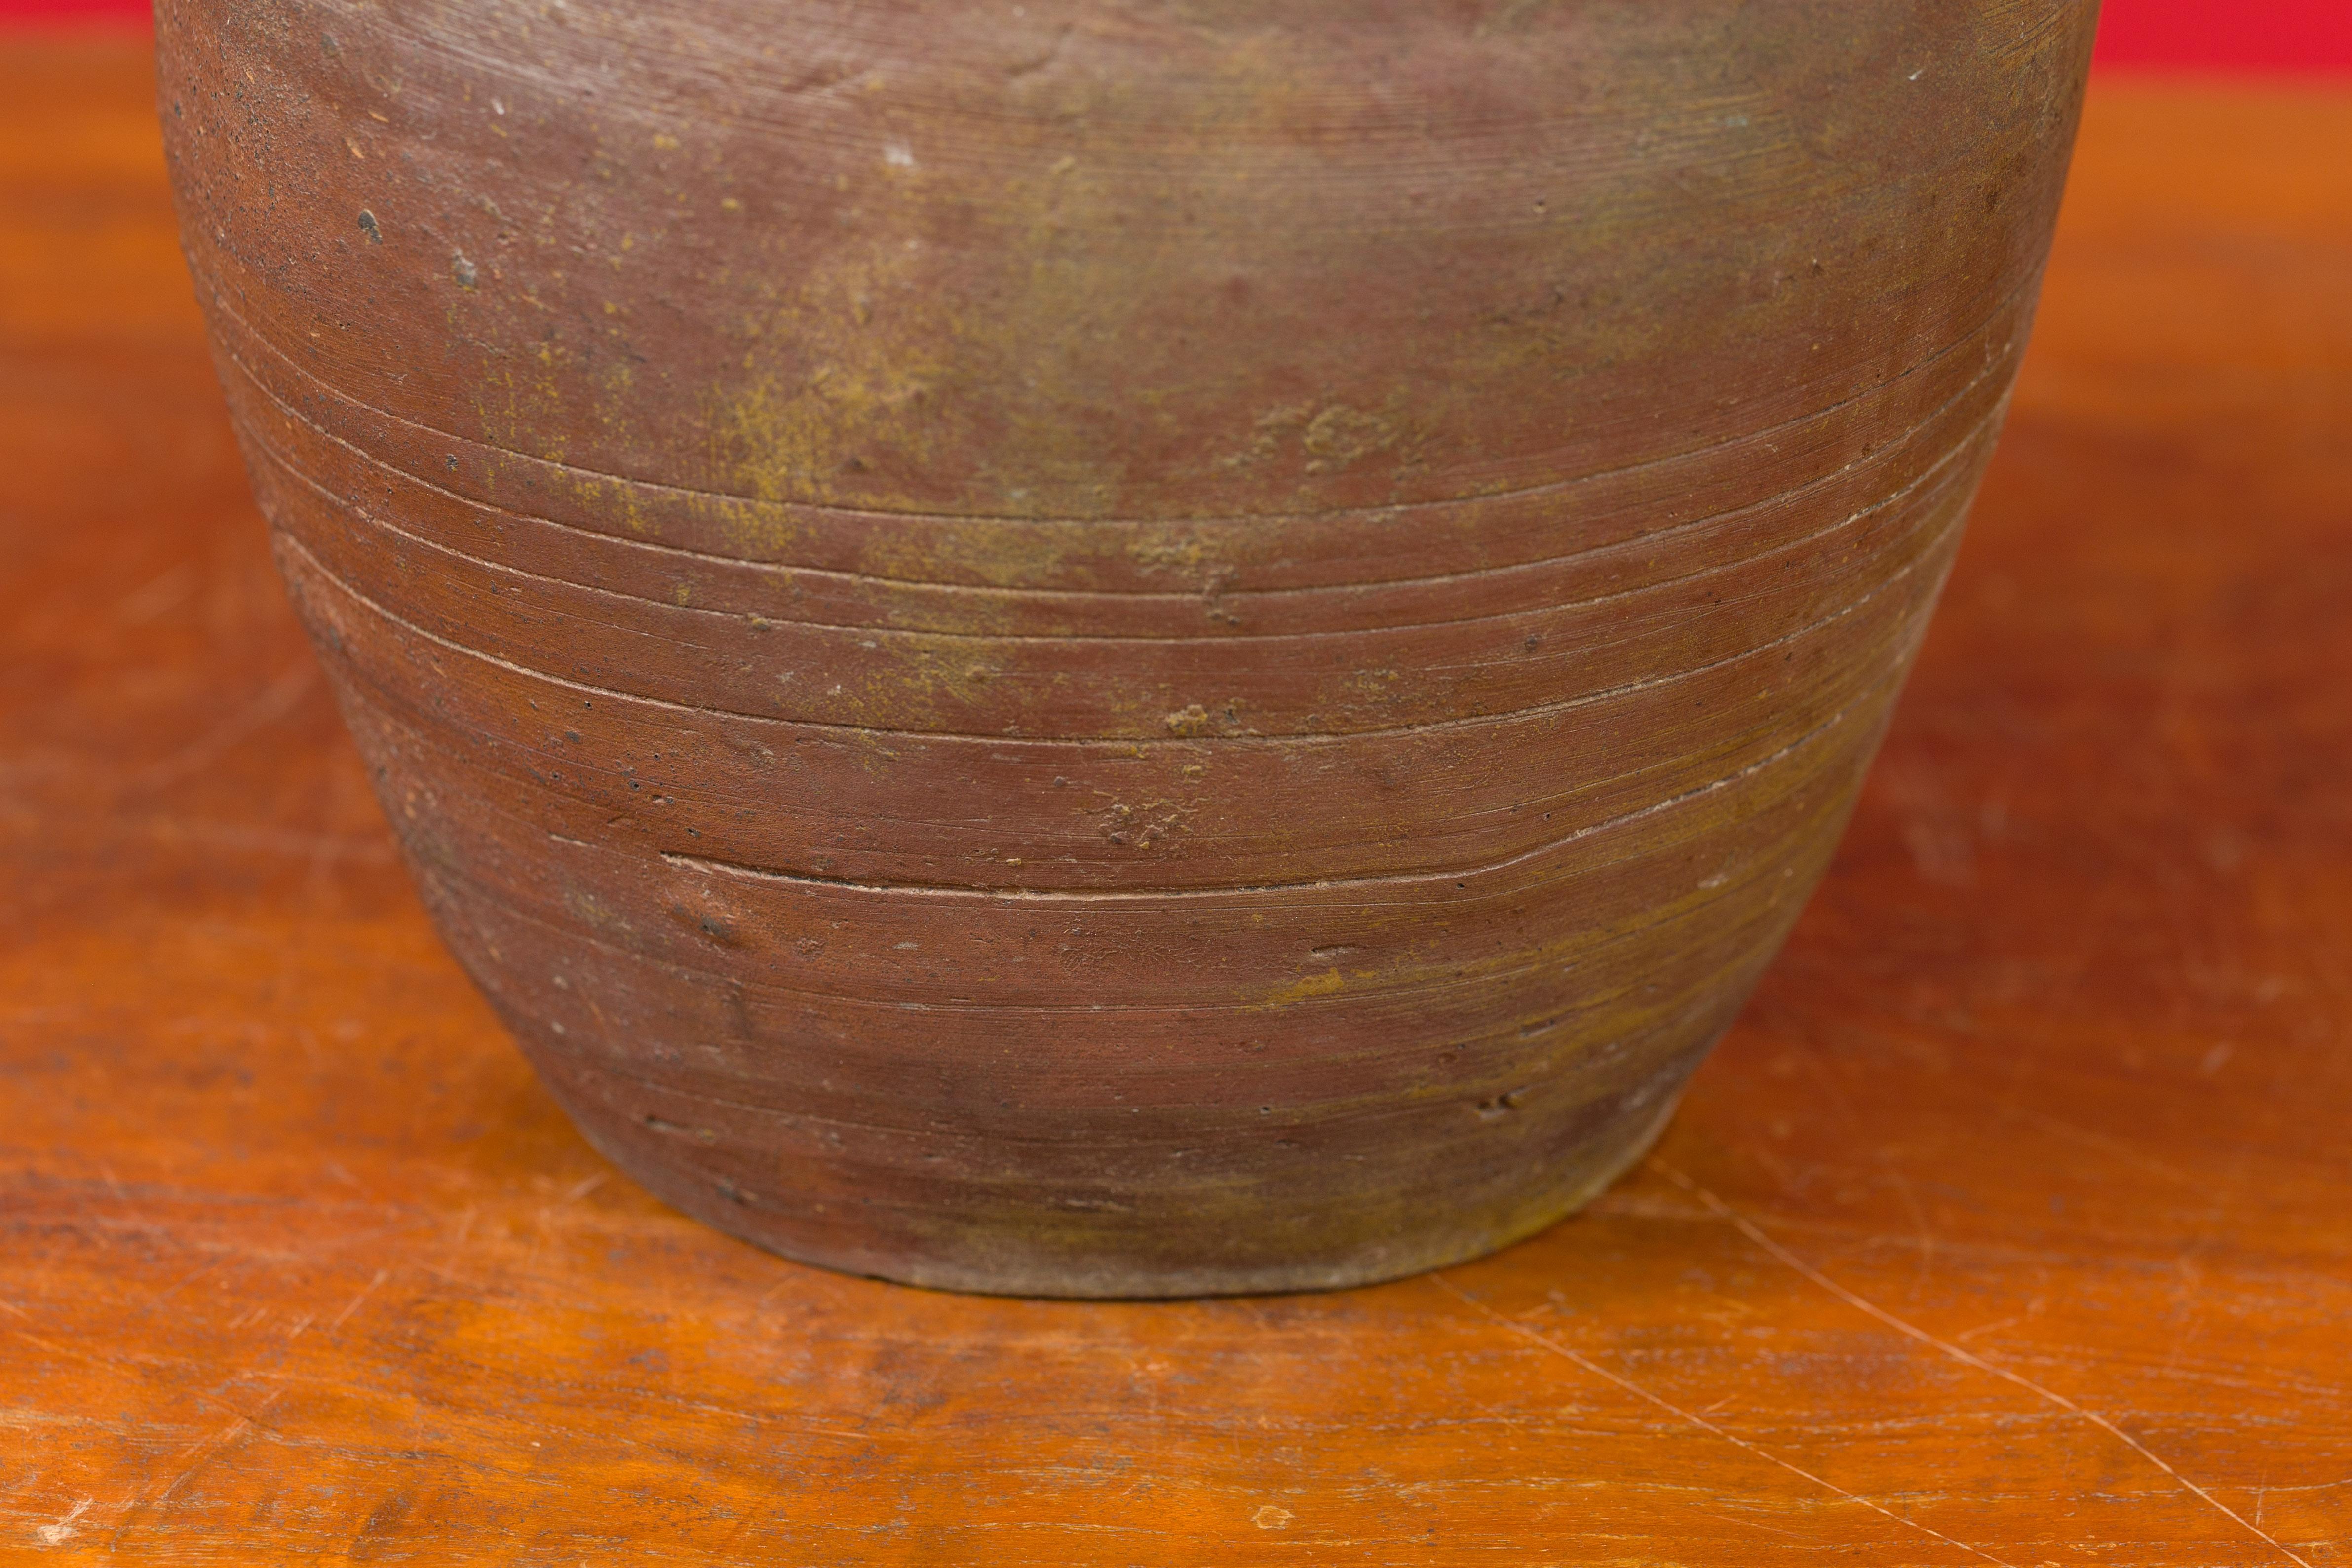 Japanese Meiji Period Early 20th Century Sake Bottle with Brown Patina For Sale 3